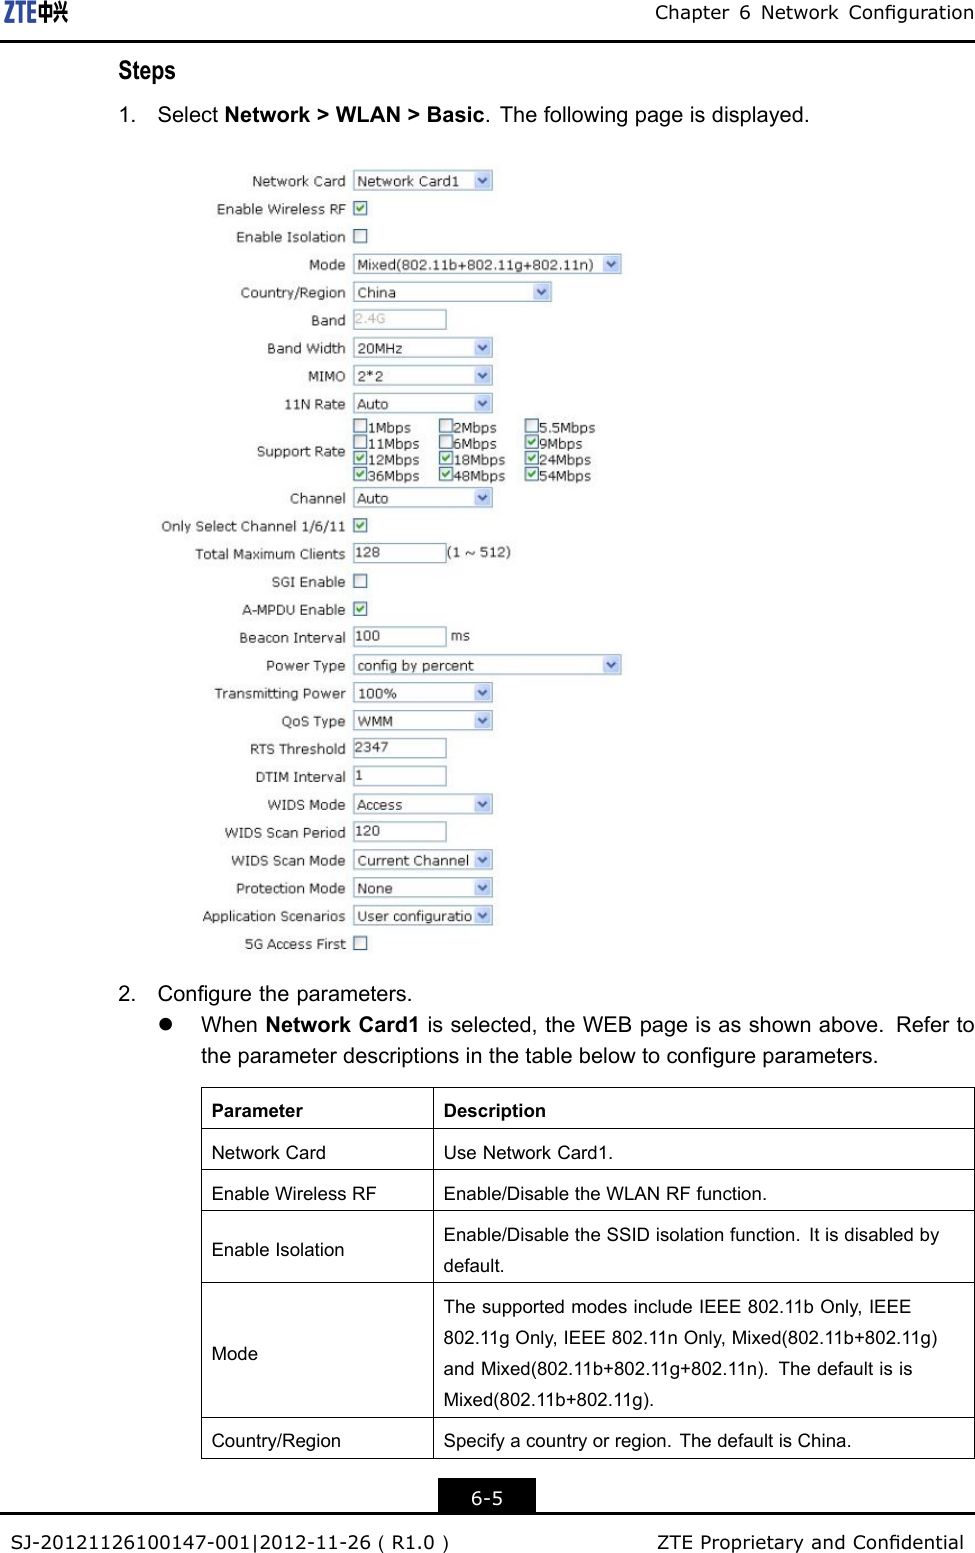 Chapter6NetworkCongurationSteps1.SelectNetwork&gt;WLAN&gt;Basic.Thefollowingpageisdisplayed.2.Conguretheparameters.lWhenNetworkCard1isselected,theWEBpageisasshownabove.Refertotheparameterdescriptionsinthetablebelowtocongureparameters.ParameterDescriptionNetworkCardUseNetworkCard1.EnableWirelessRFEnable/DisabletheWLANRFfunction.EnableIsolationEnable/DisabletheSSIDisolationfunction.Itisdisabledbydefault.ModeThesupportedmodesincludeIEEE802.11bOnly,IEEE802.11gOnly,IEEE802.11nOnly,Mixed(802.11b+802.11g)andMixed(802.11b+802.11g+802.11n).ThedefaultisisMixed(802.11b+802.11g).Country/RegionSpecifyacountryorregion.ThedefaultisChina.6-5SJ-20121126100147-001|2012-11-26（R1.0）ZTEProprietaryandCondential